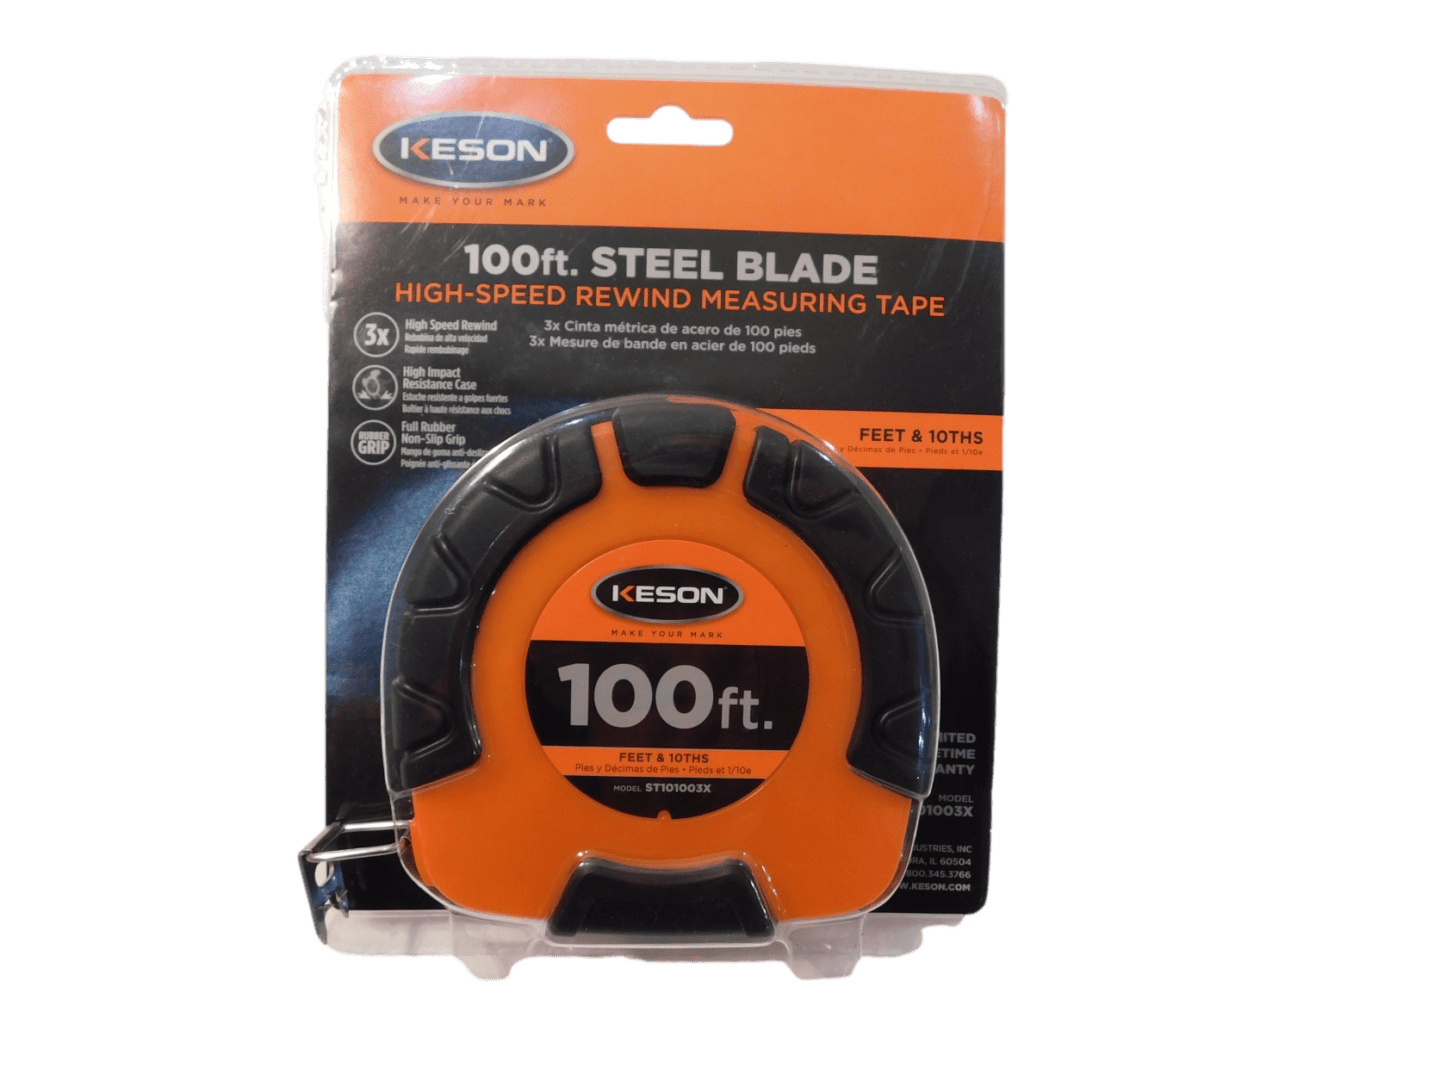 Keson 100 FT Engineer’s Nyclad Tape Compact 10ths/100ths